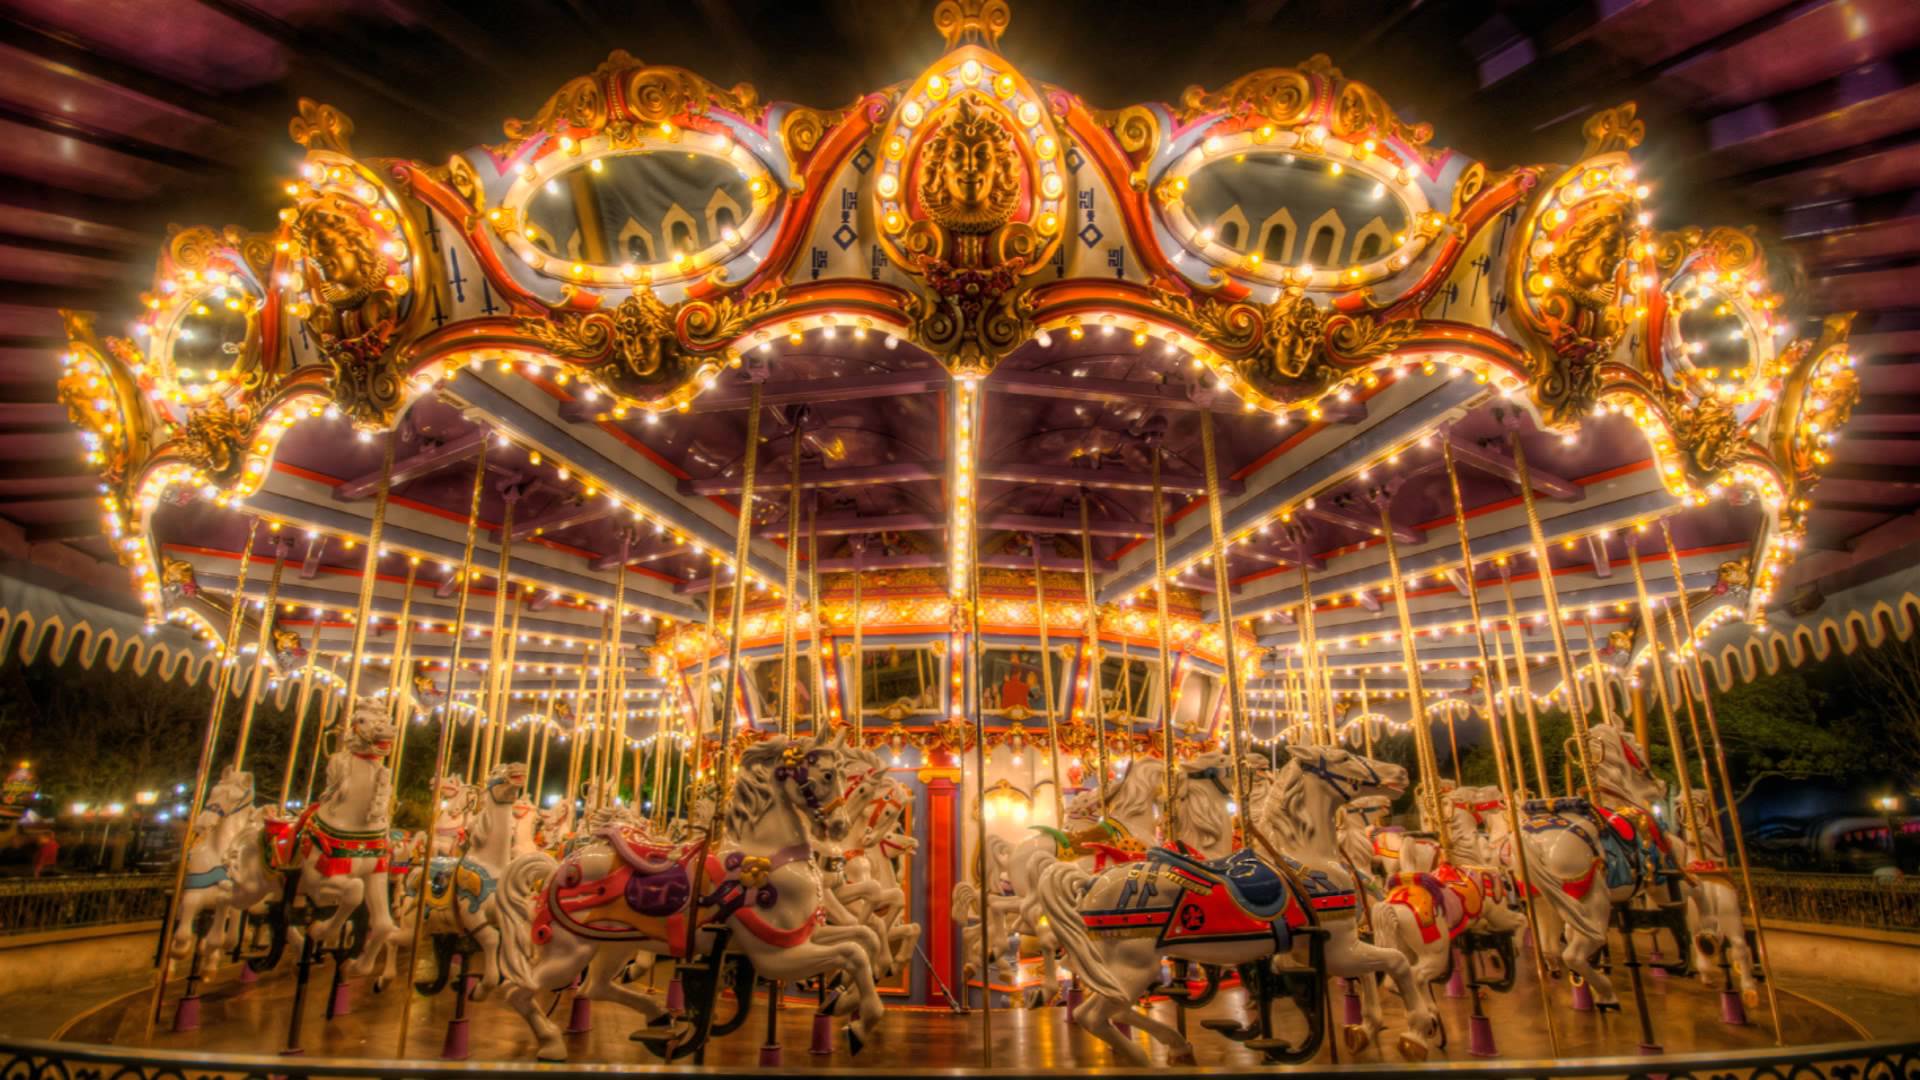 HQ Carousel Wallpapers | File 277.2Kb